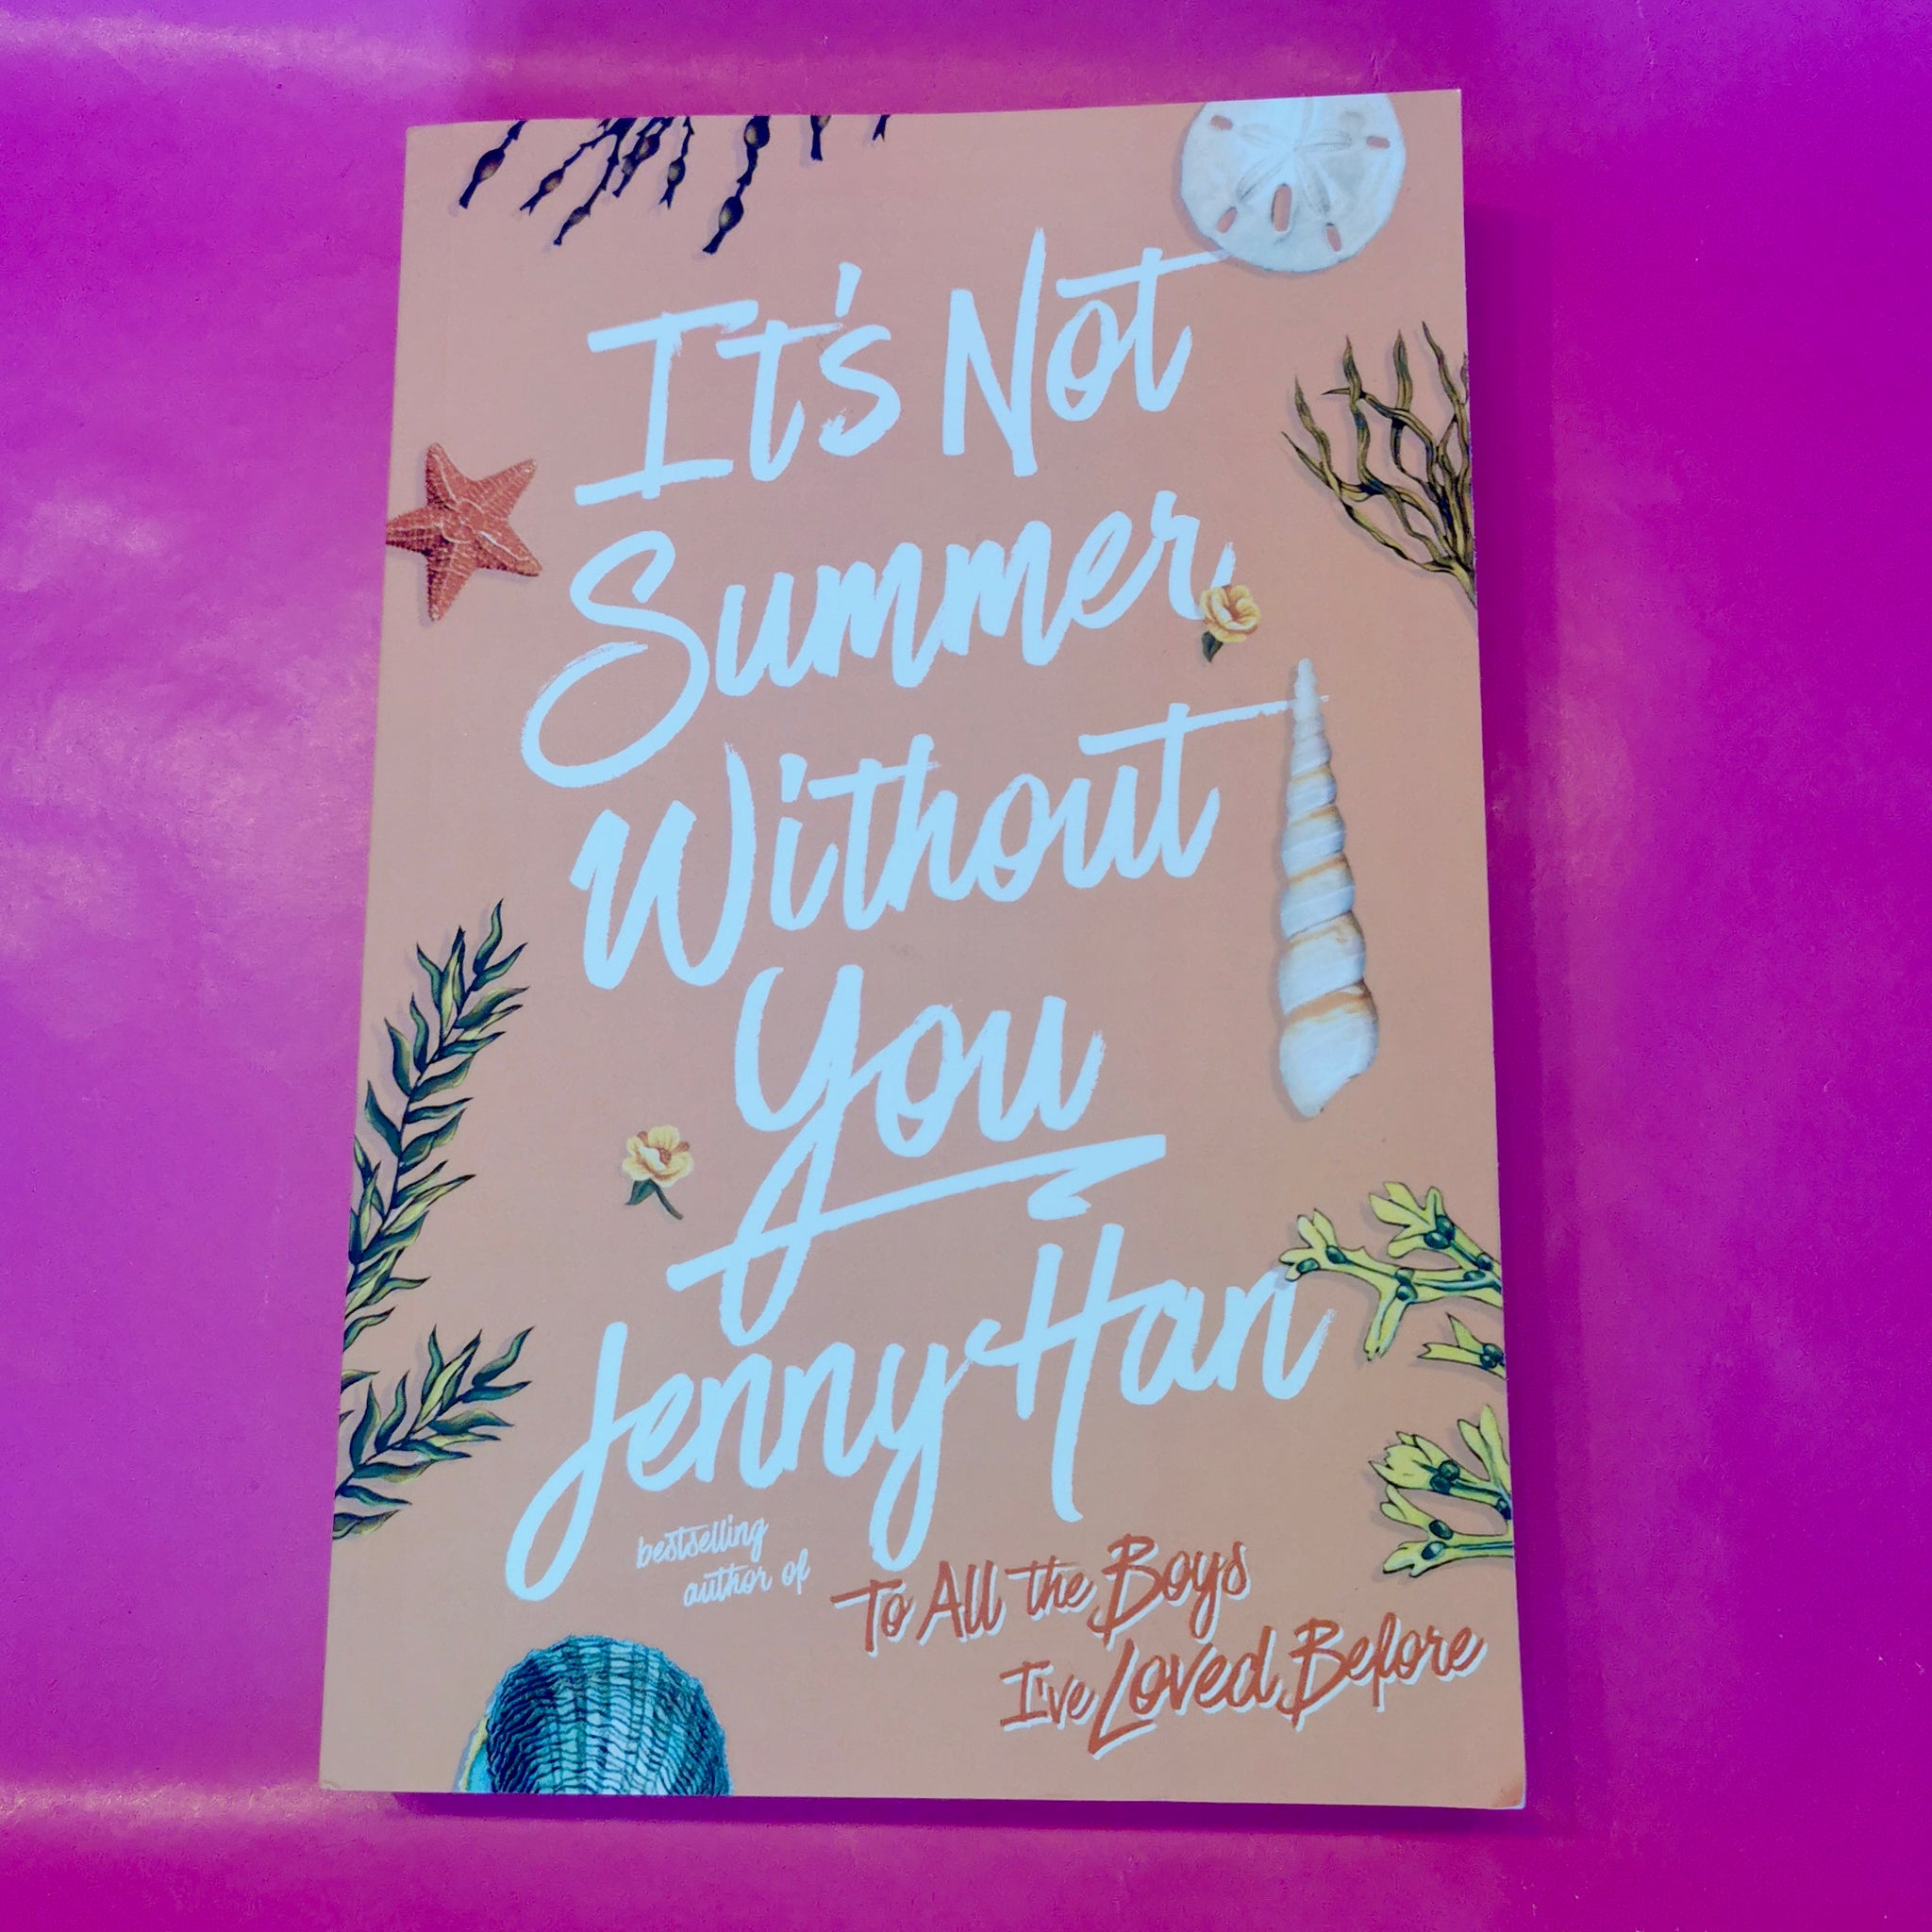  It's Not Summer Without You: 9781416995562: Han, Jenny: Books